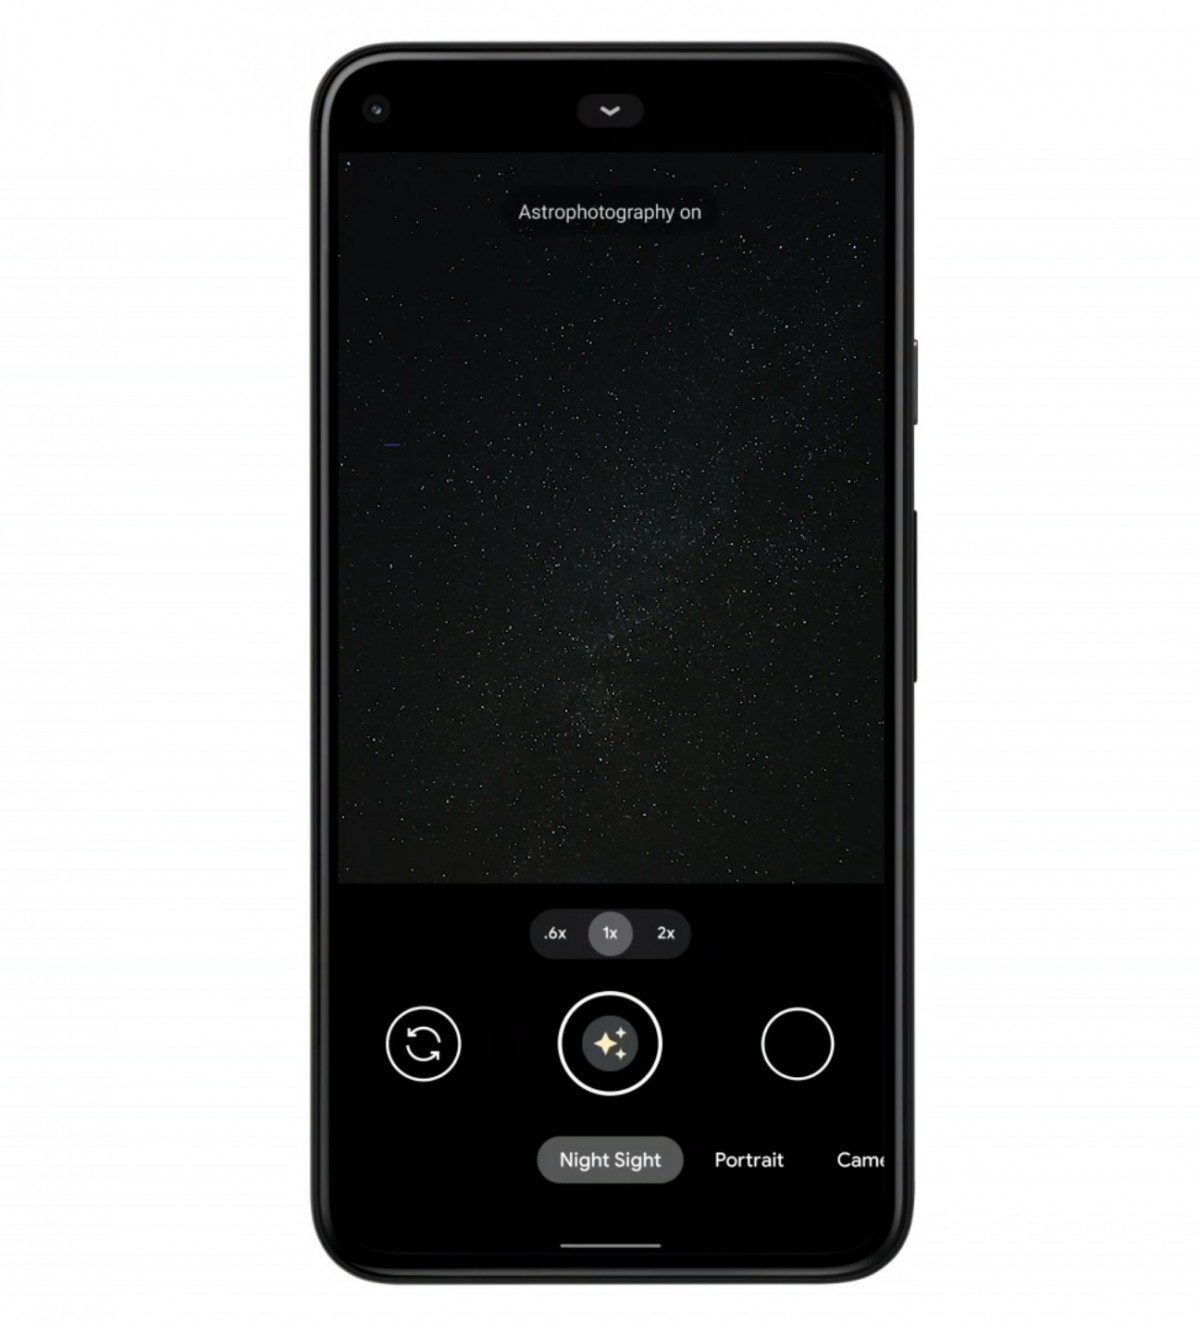 Google's Astrophotography feature activates at night and on a tripod